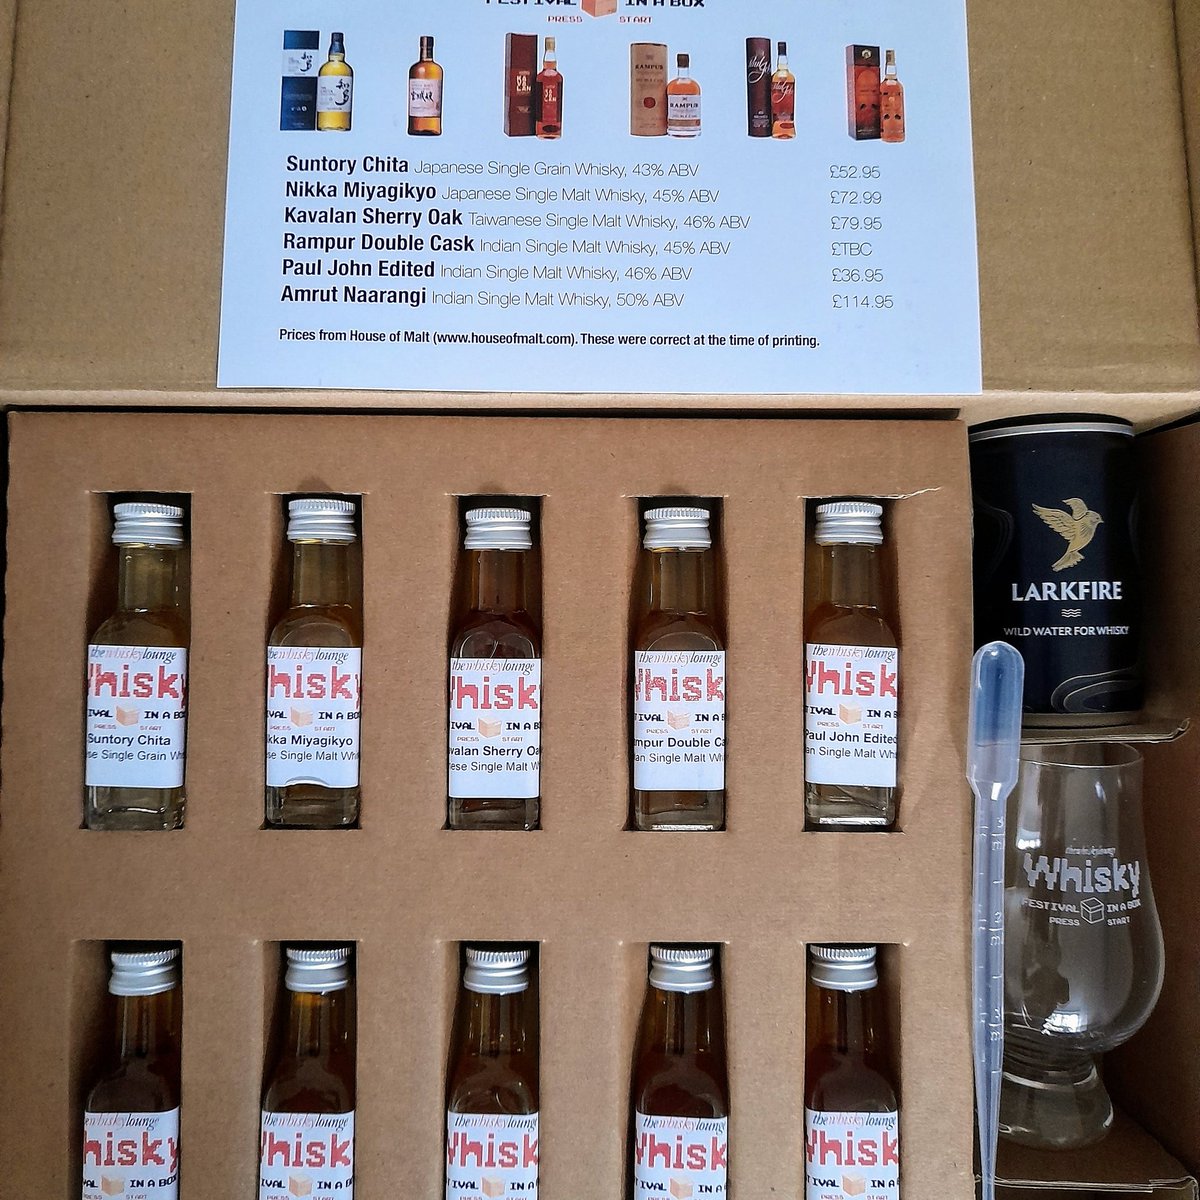 #festivalinabox is almost here! Good selection of Asian #whiskey to try tomorrow with @TheWhiskyLounge